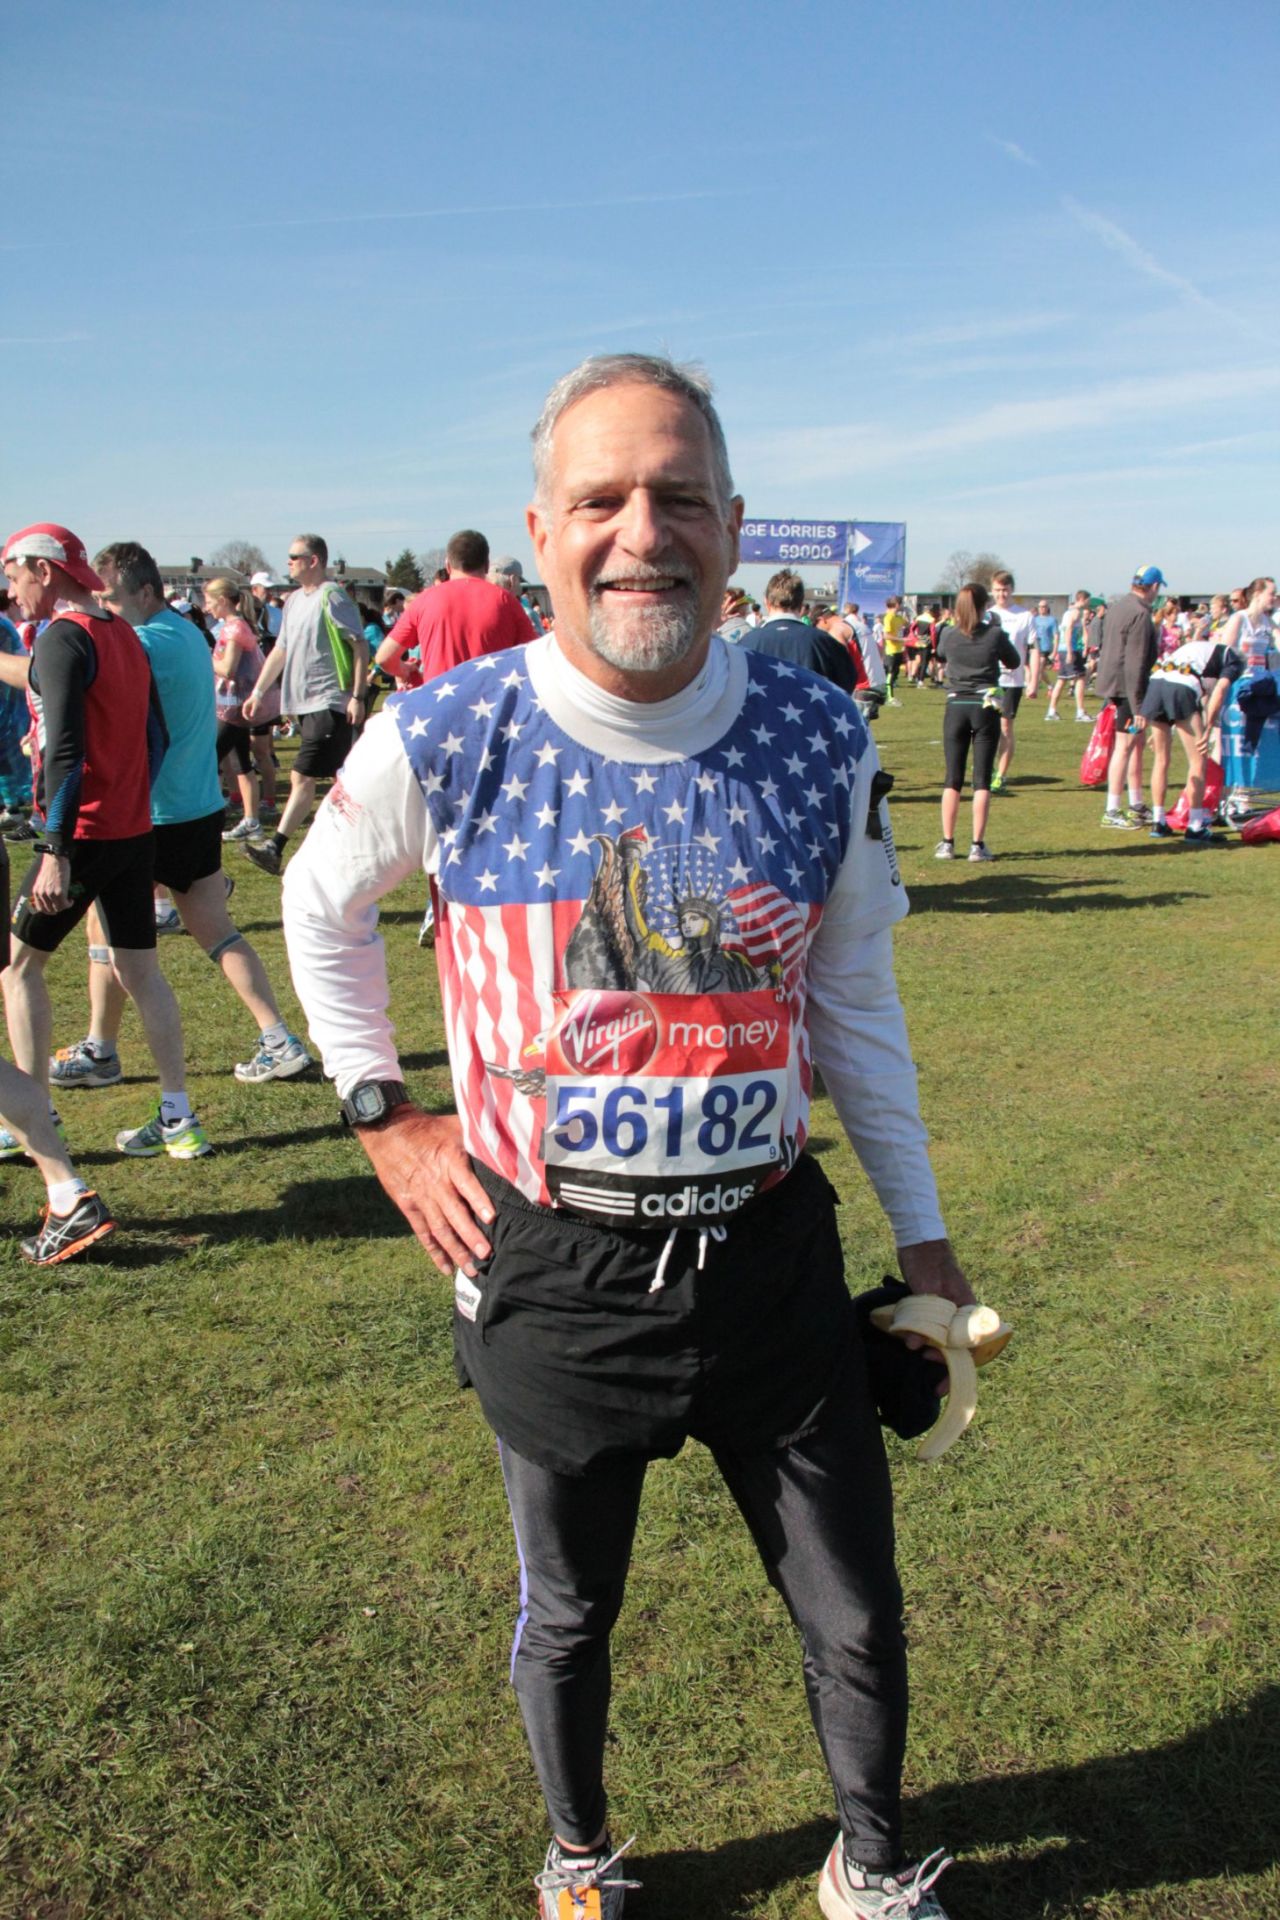 Bill Higgins, 62 from California is a seasoned marathon runner having competed in 84 races. He told CNN: "I've run Boston three times and (the Boston terror attack) really hit home. It's a thrill and an honor to be here."